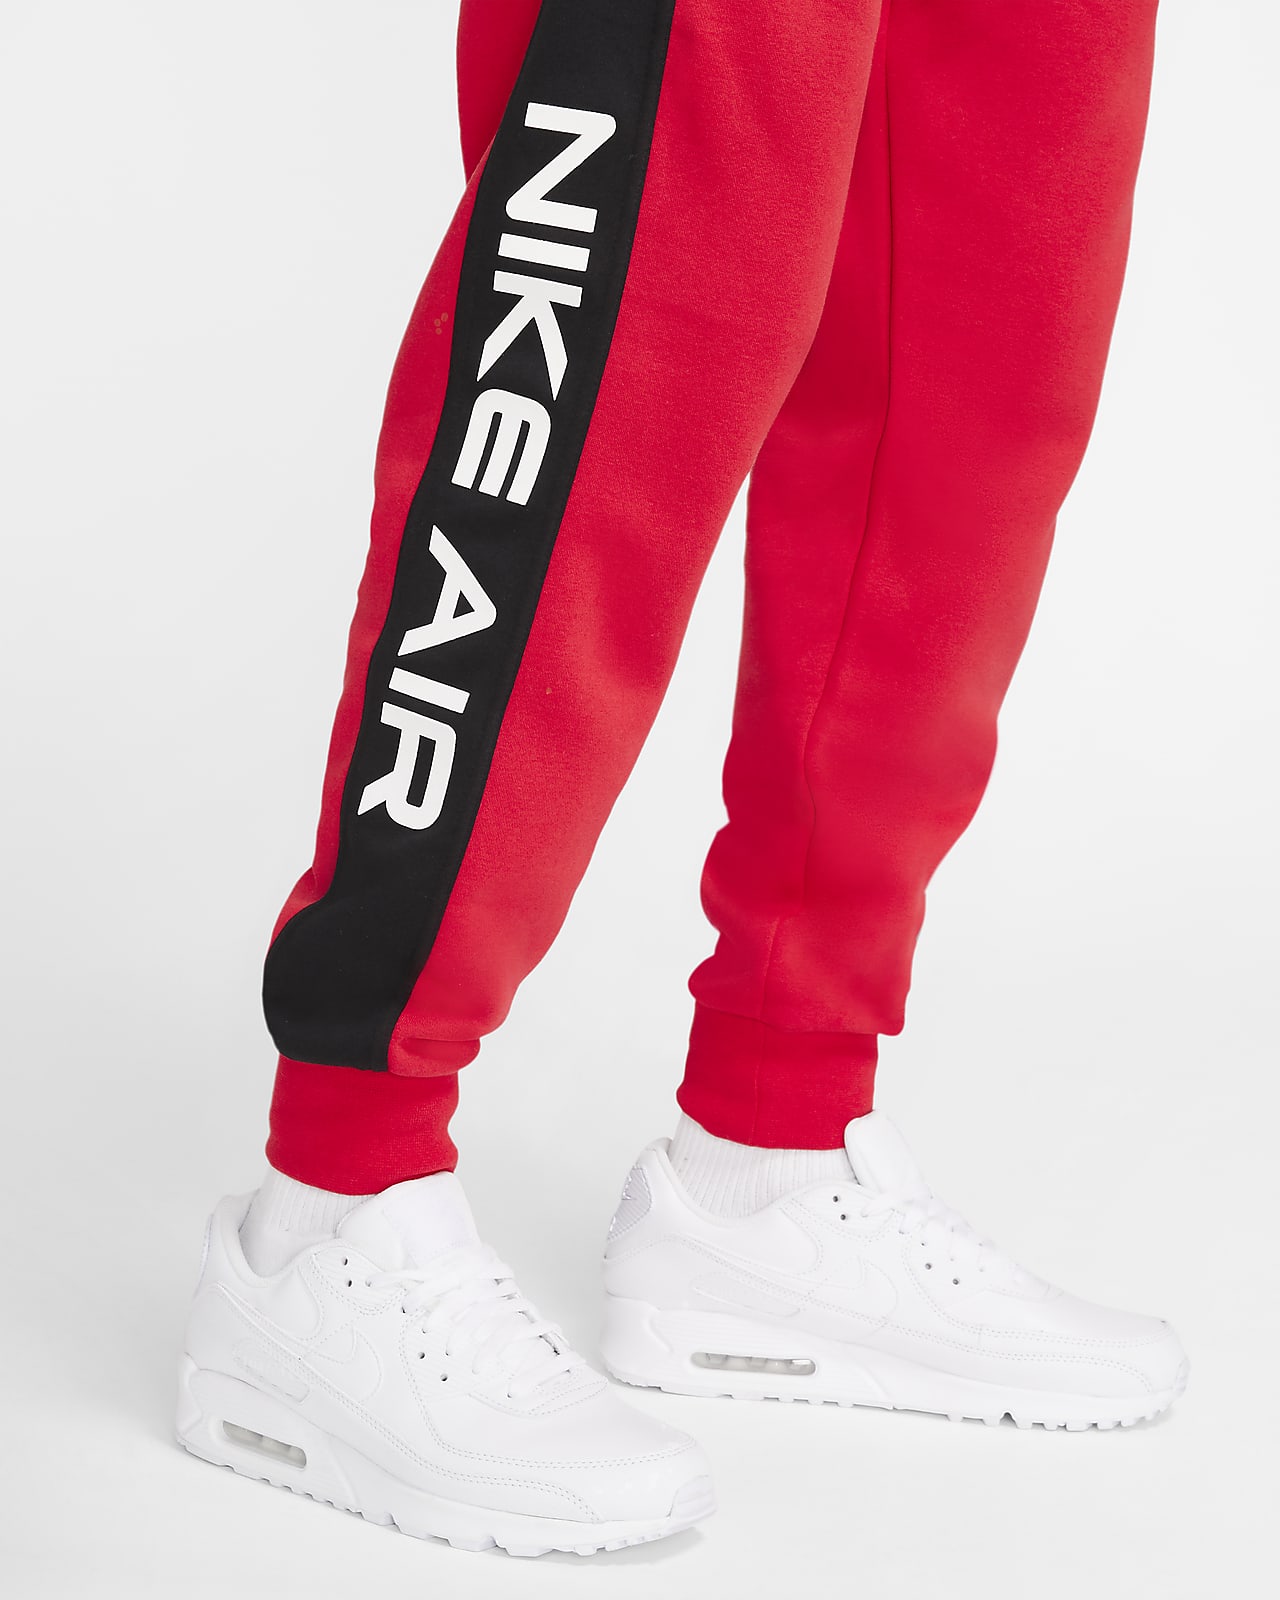 mens nike red joggers